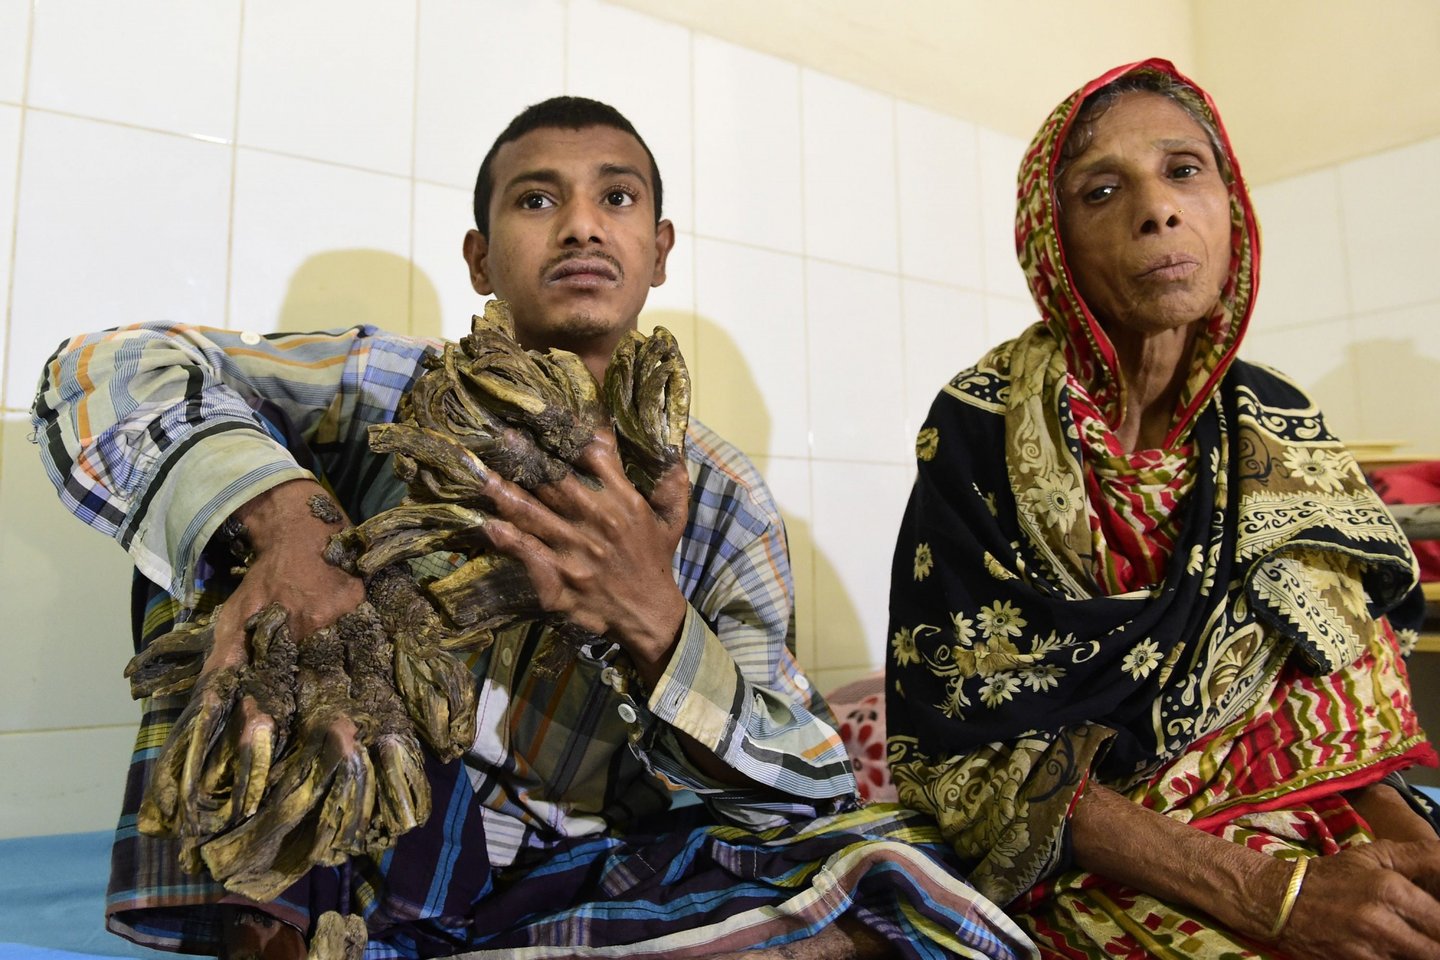 Abul Bajandar (L), 26, dubbed "Tree Man" for massive bark-like warts on his hands and feet, sits at Dhaka Medical College Hospital in Dhaka on January 31, 2016. A Bangladeshi autodriver dubbed "Tree Man" for massive bark-like warts on his hands and feet will finally have surgery to remove the growths that first appeared 10 years ago, a hospital said on January 31, 2016. The massive warts, which first started appearing when he was a teenager but began spreading rapidly four years ago, have been diagnosed as epidermodysplasia verruciformis, an extremely rare genetic skin disease that makes the person vulnerable to warts. AFP Photo/ Munir uz ZAMAN / AFP / MUNIR UZ ZAMAN (Photo credit should read MUNIR UZ ZAMAN/AFP/Getty Images)